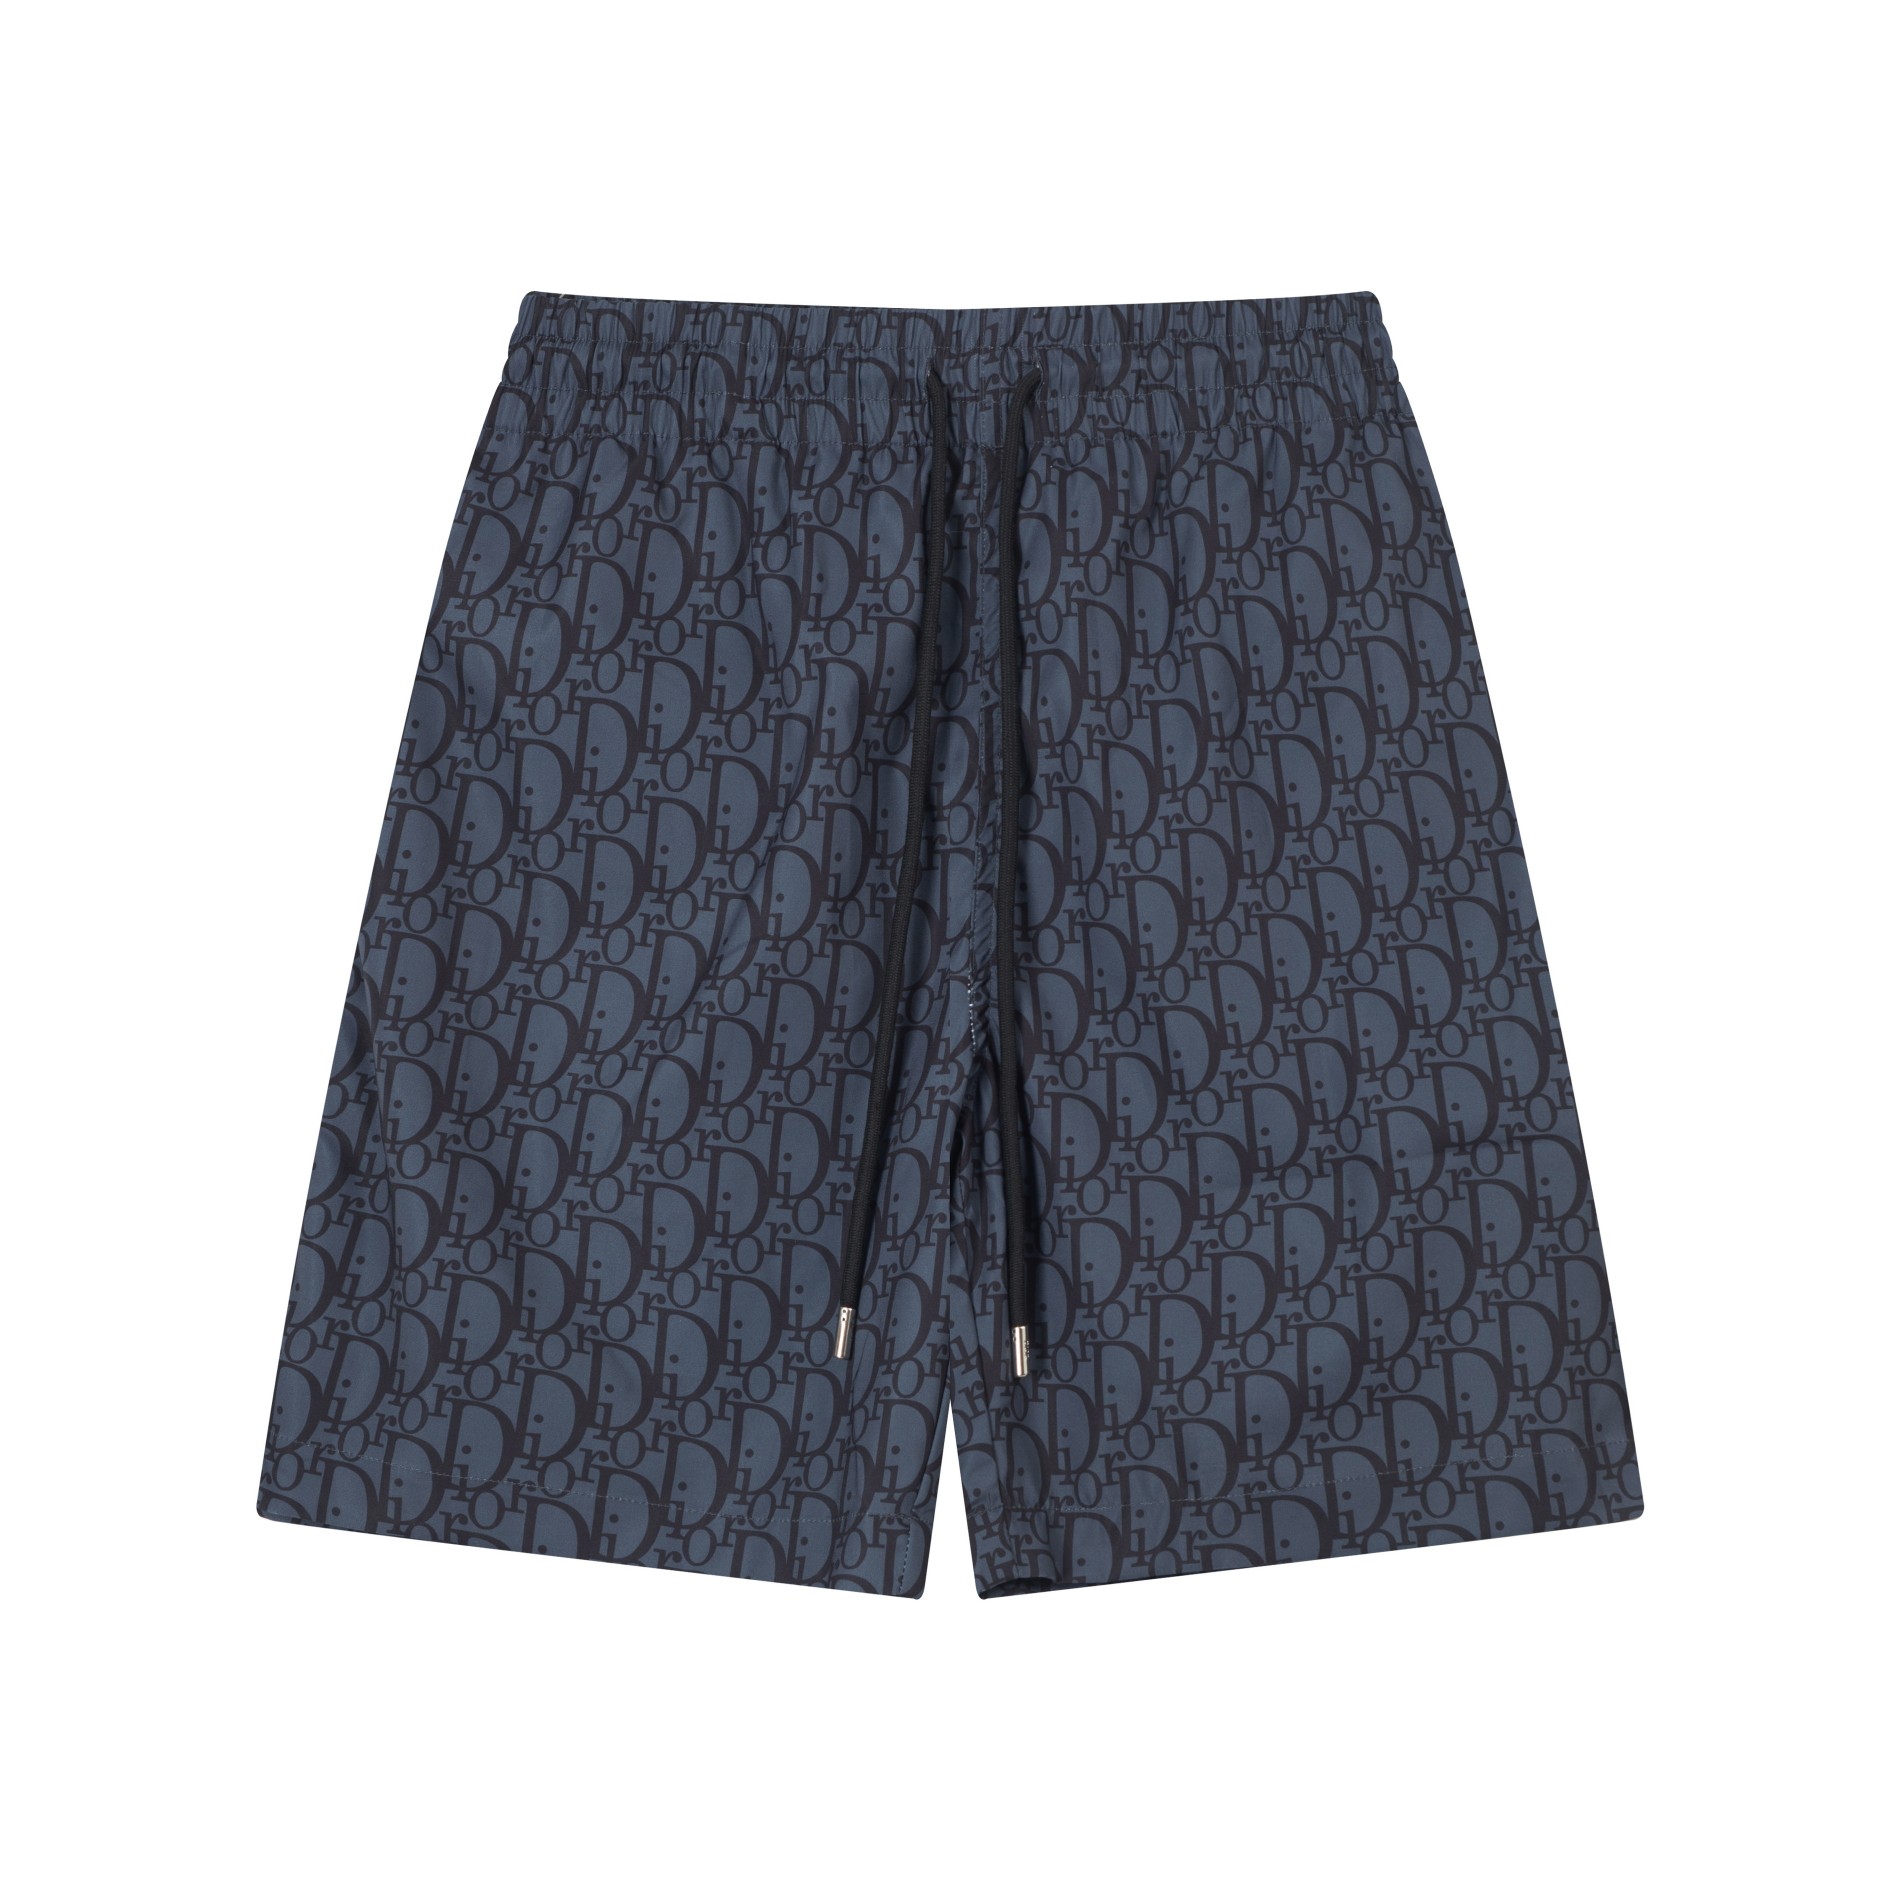 Dior Clothing Shorts Online Sale
 Polyester Summer Collection Fashion Beach